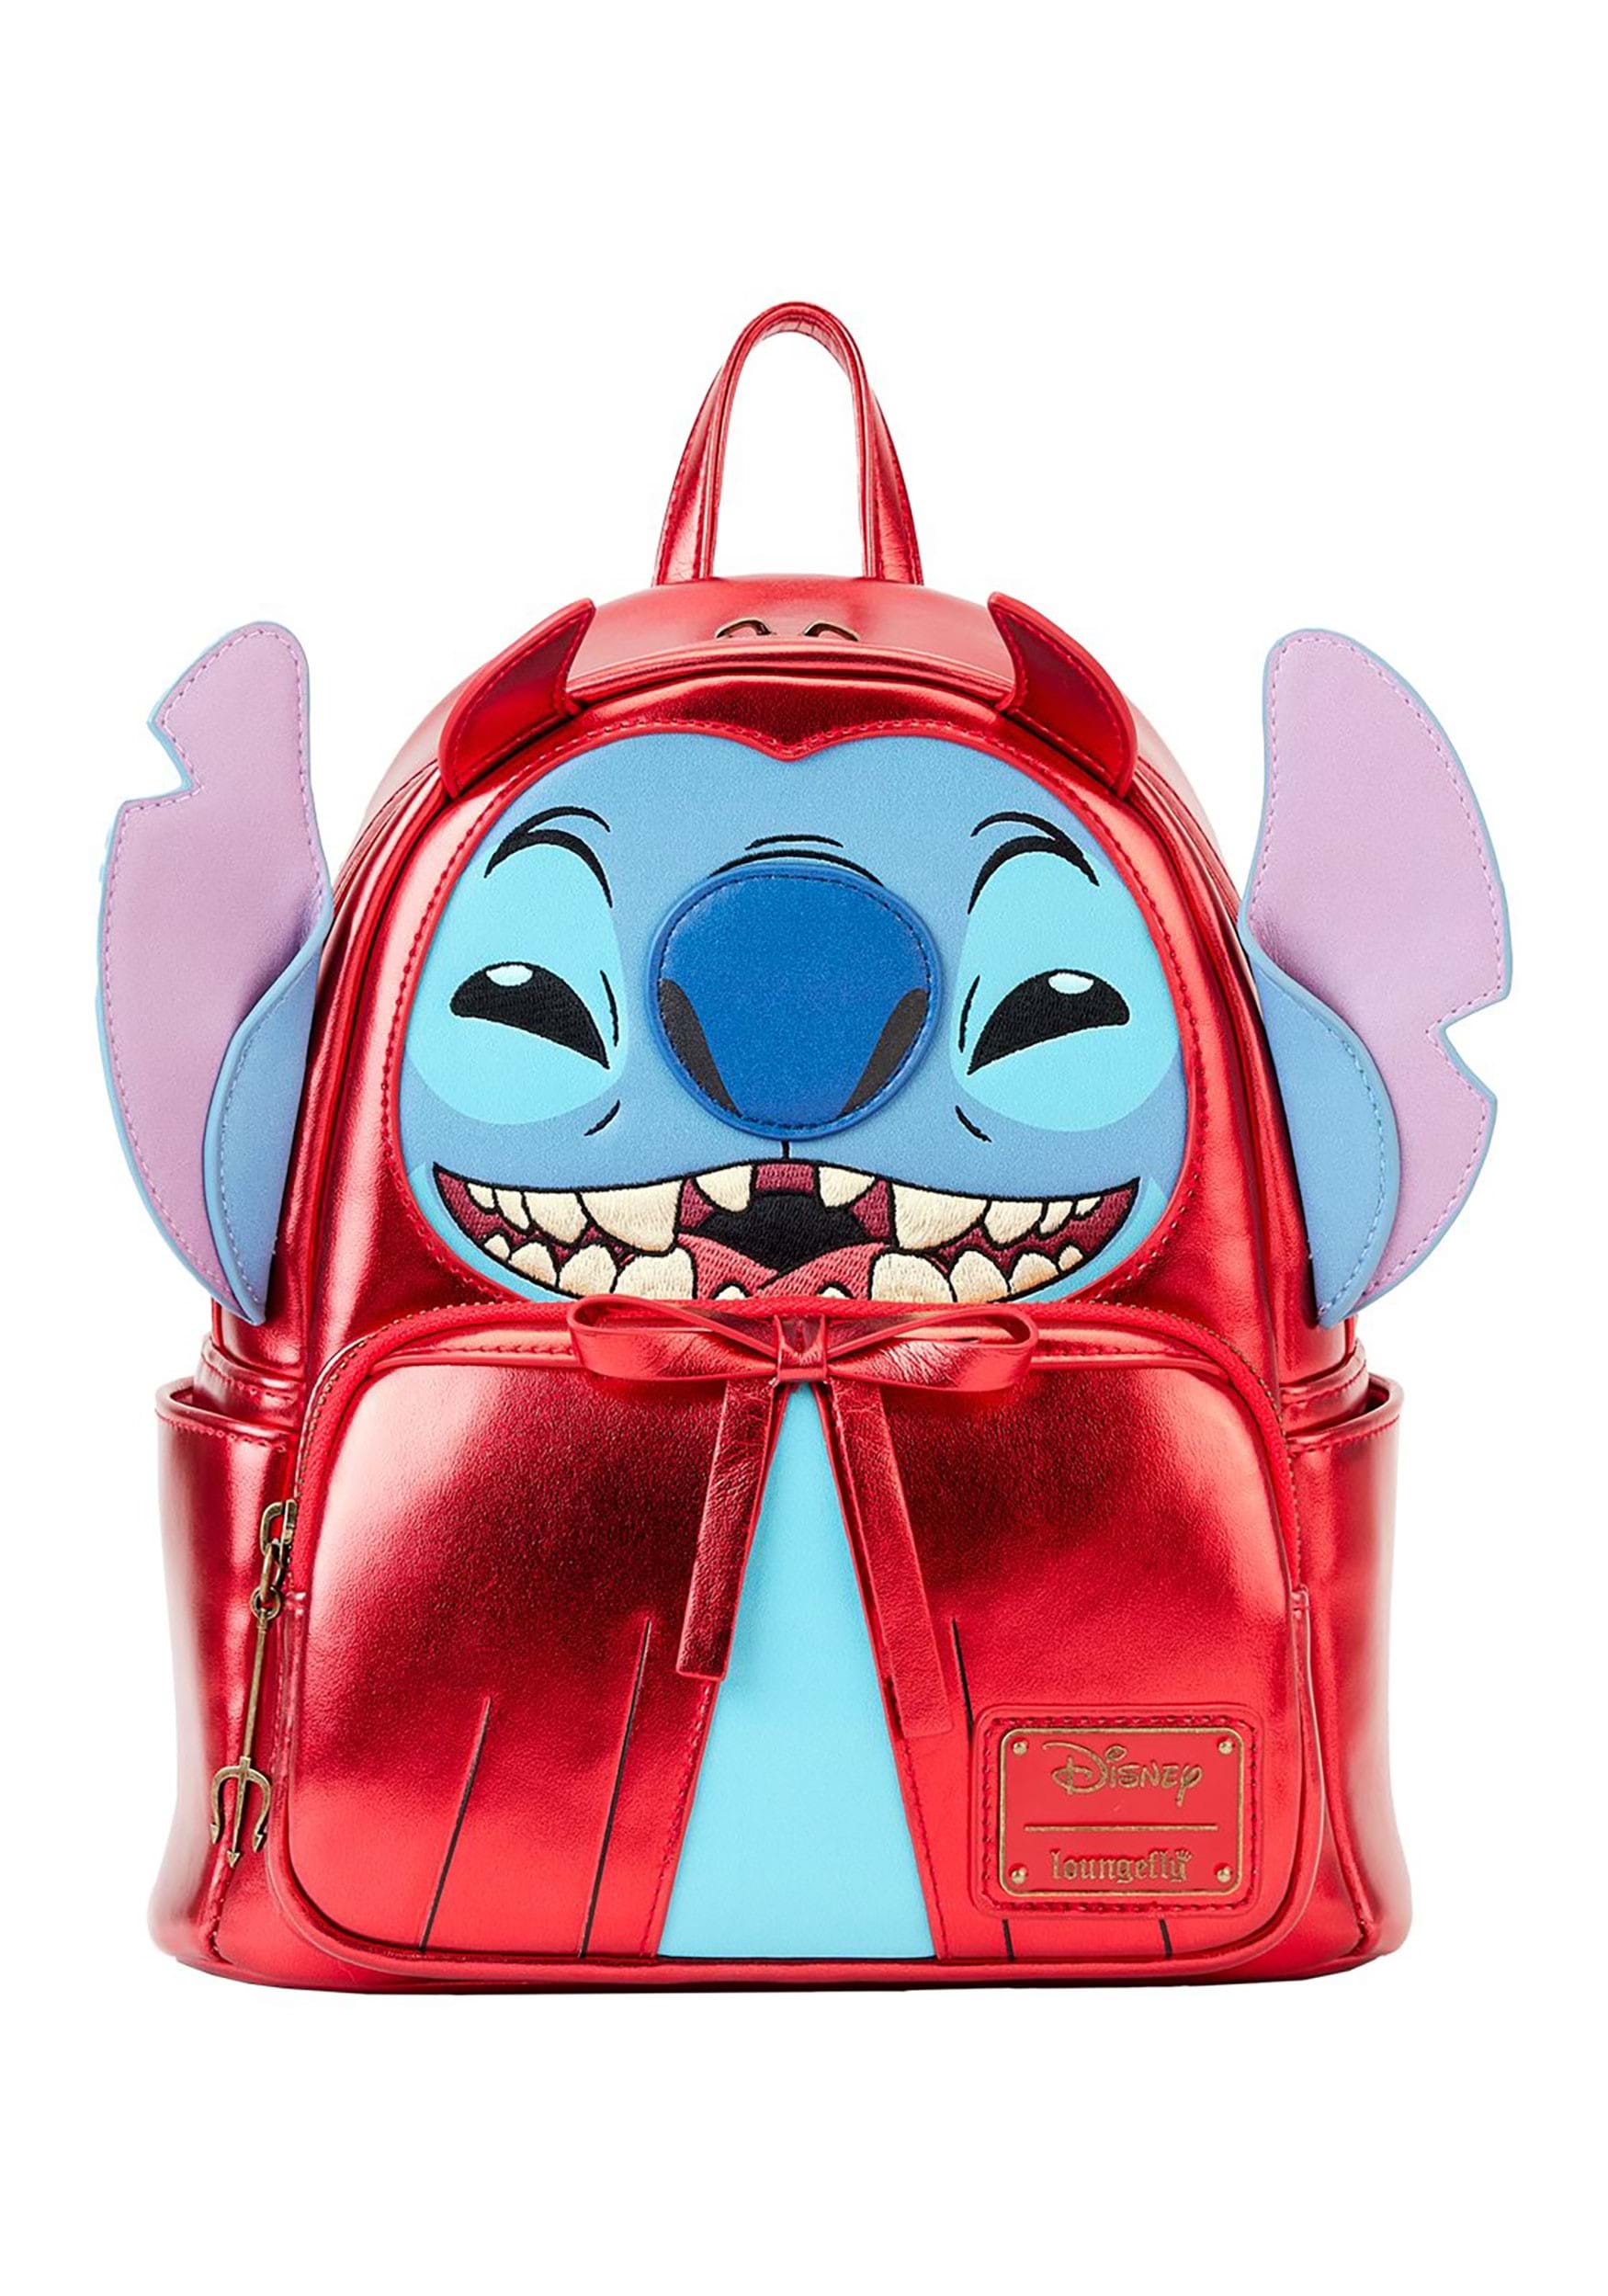 Disney Stitch Devil Cosplay Mini Backpack by Loungefly